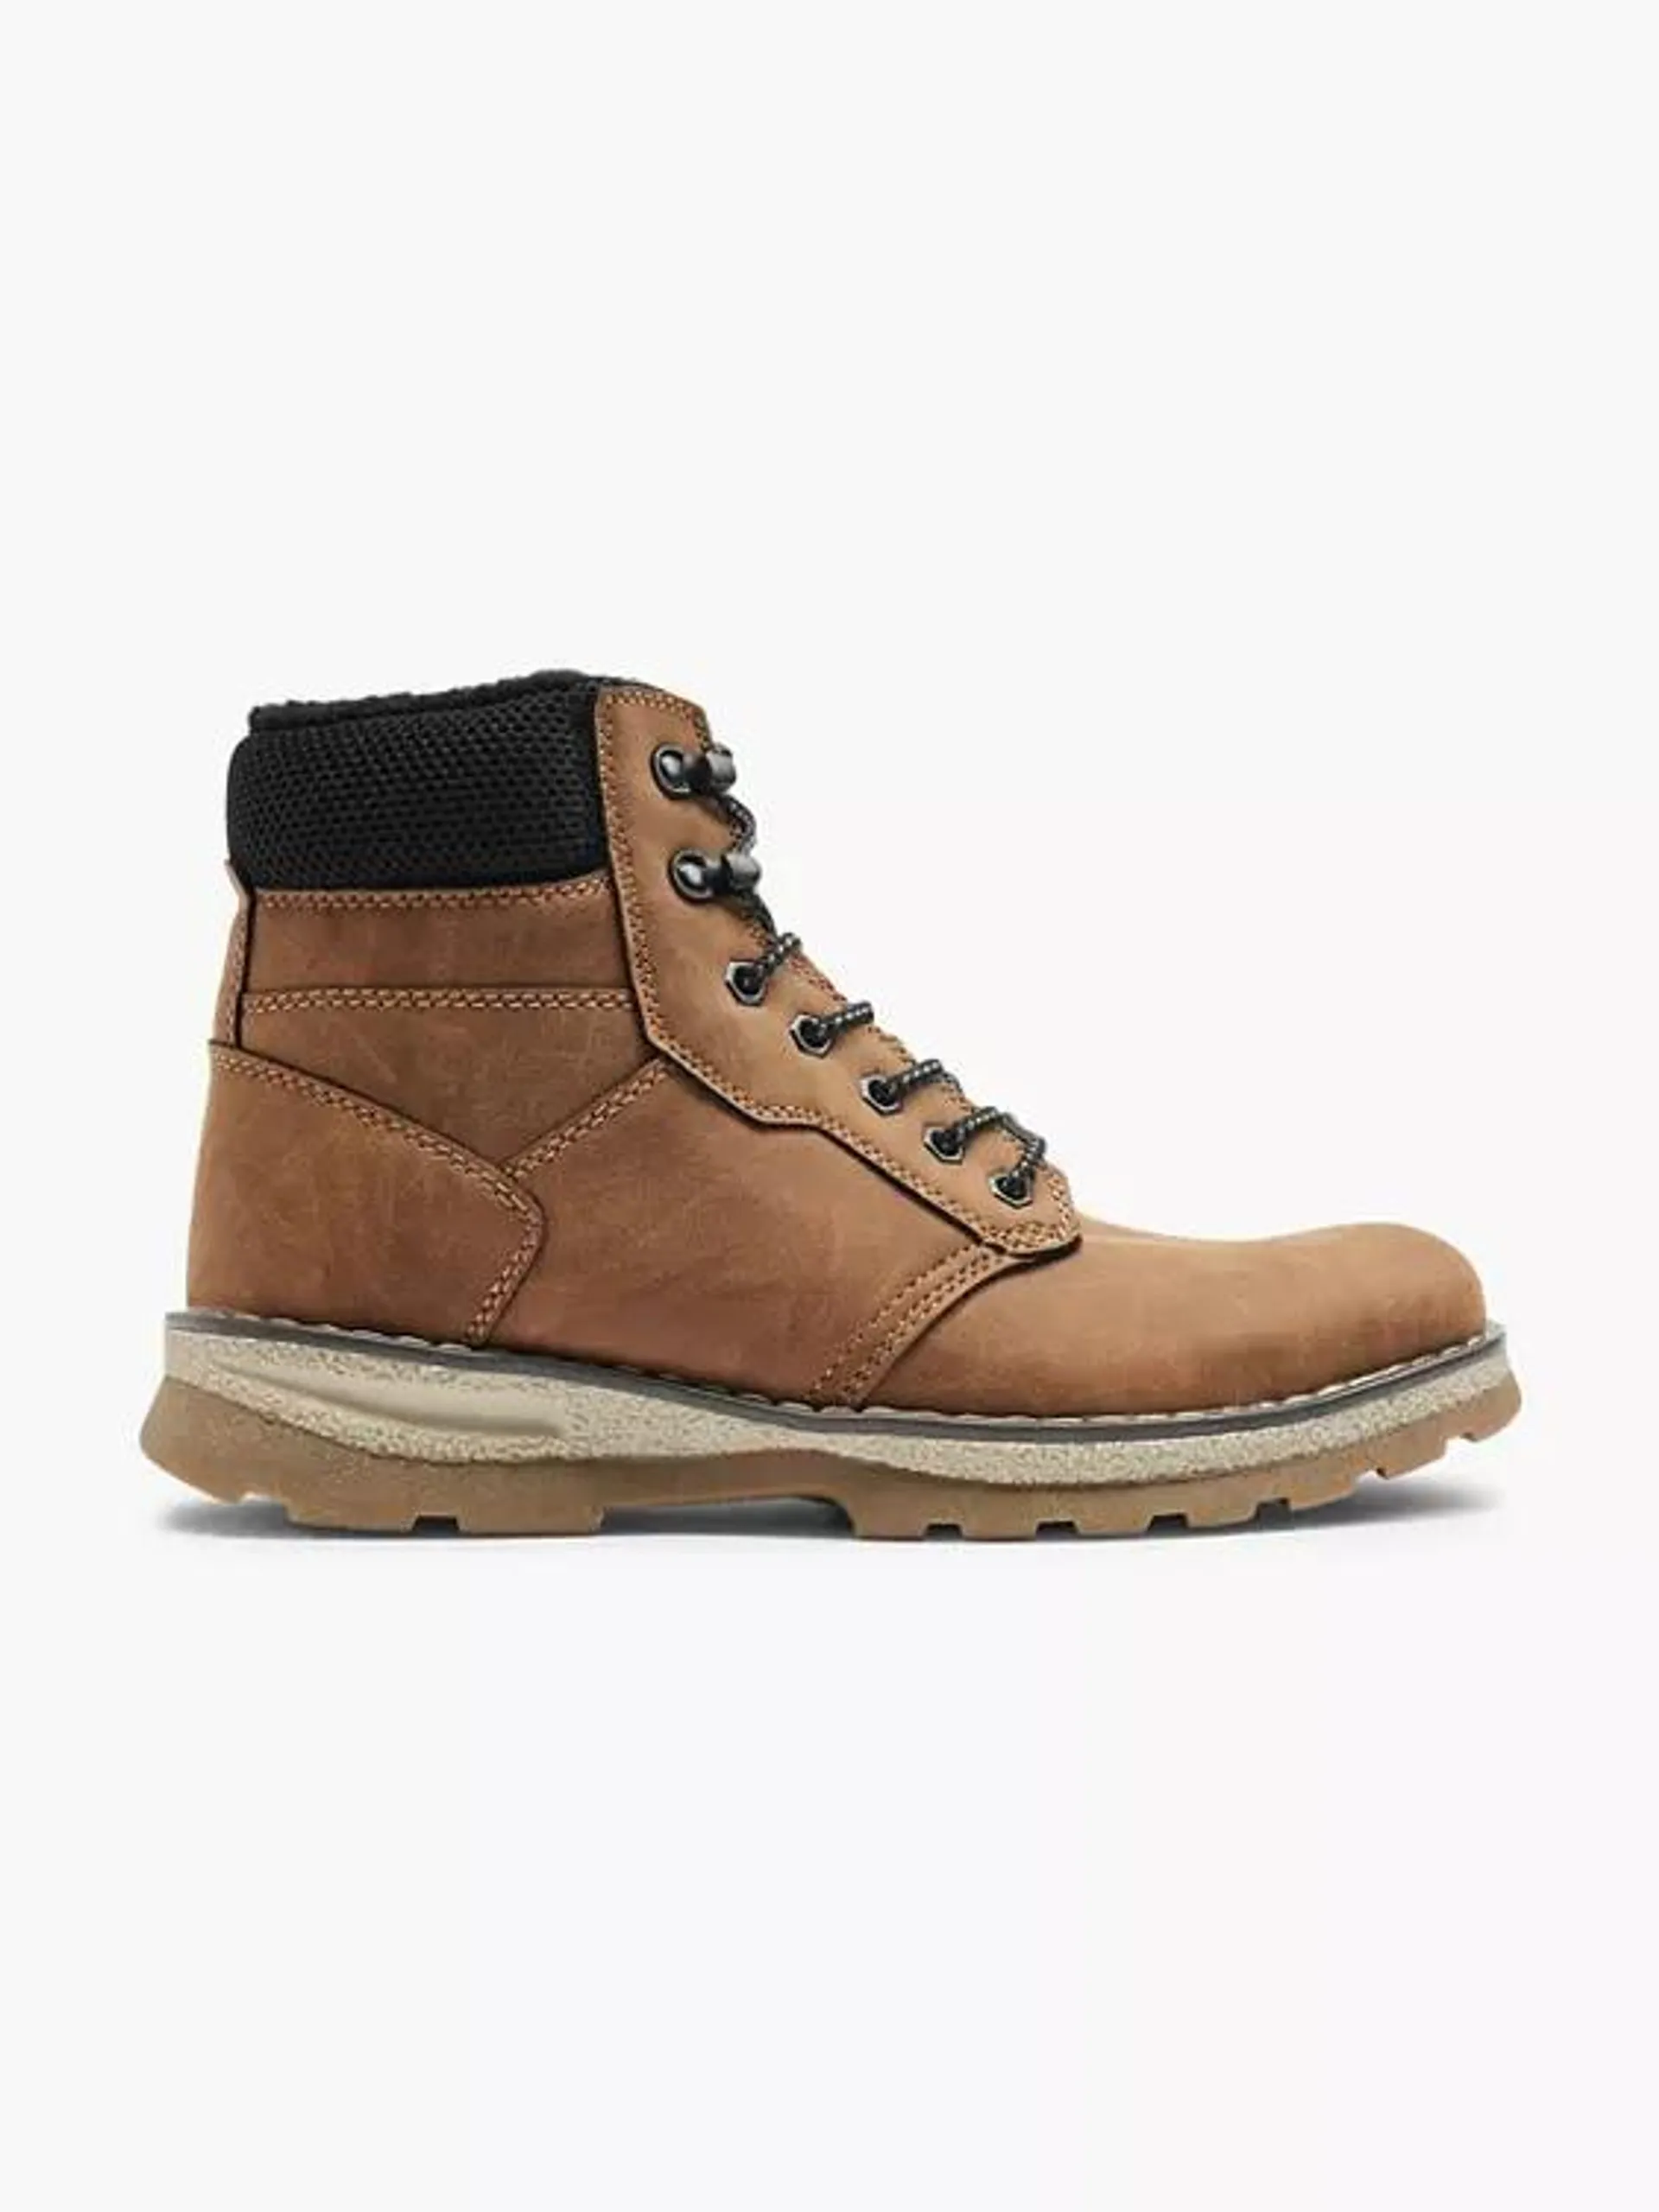 Landrover Men's Casual Lace-up Boots Honey